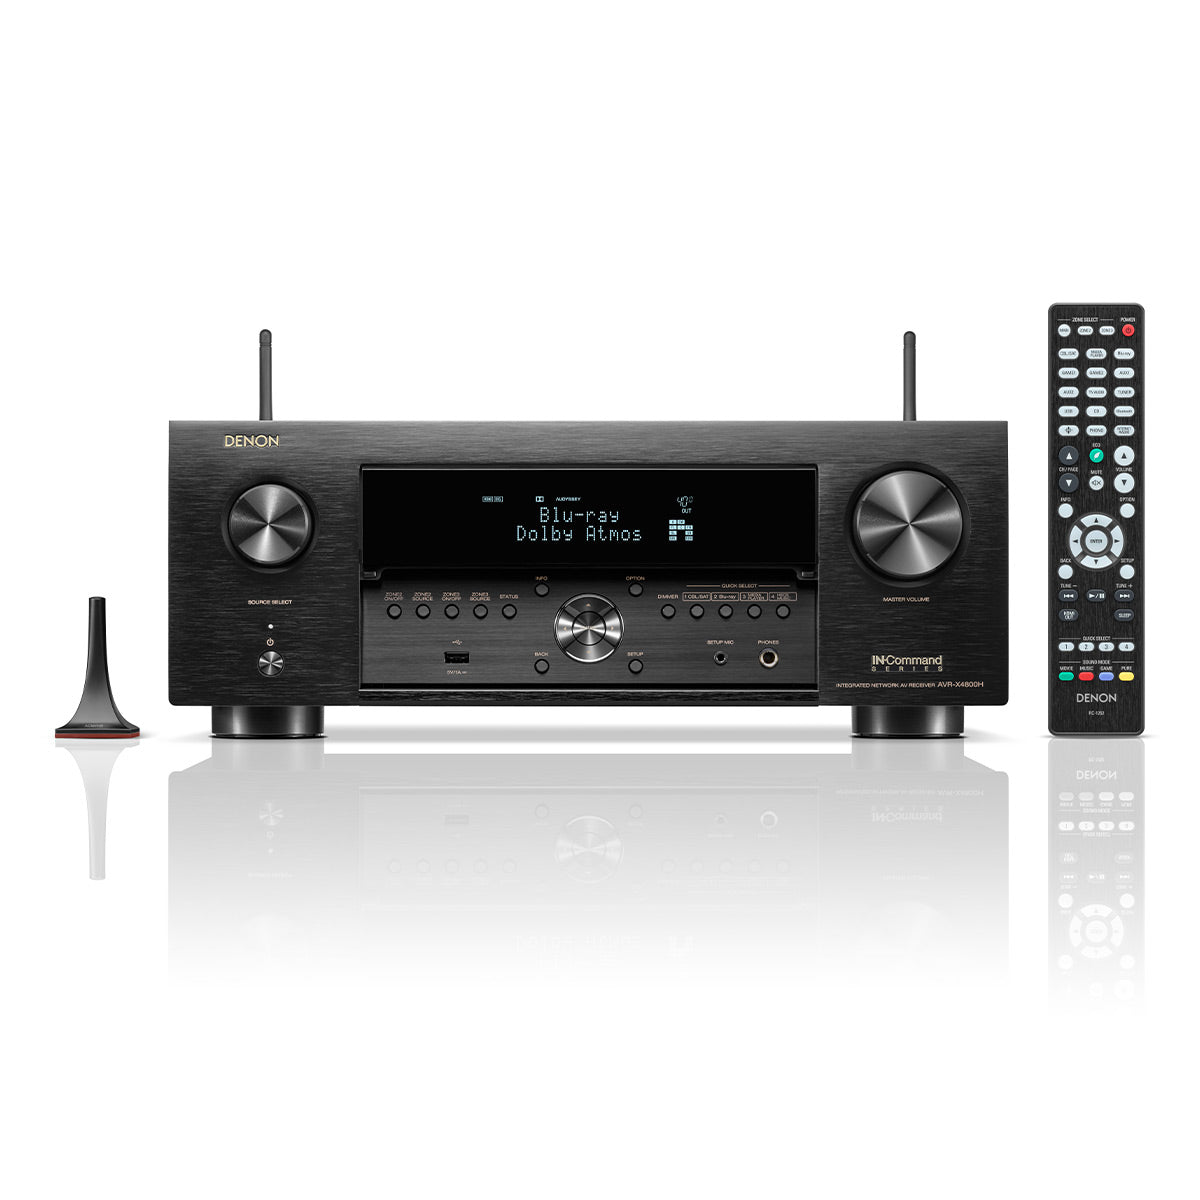 Denon AVR-X4800H 9.4 Channel 8K Home Theater Receiver IMAX Enhanced with Dolby Atmos/DTS:X and HEOS Built-In (Factory Certified Refurbished)